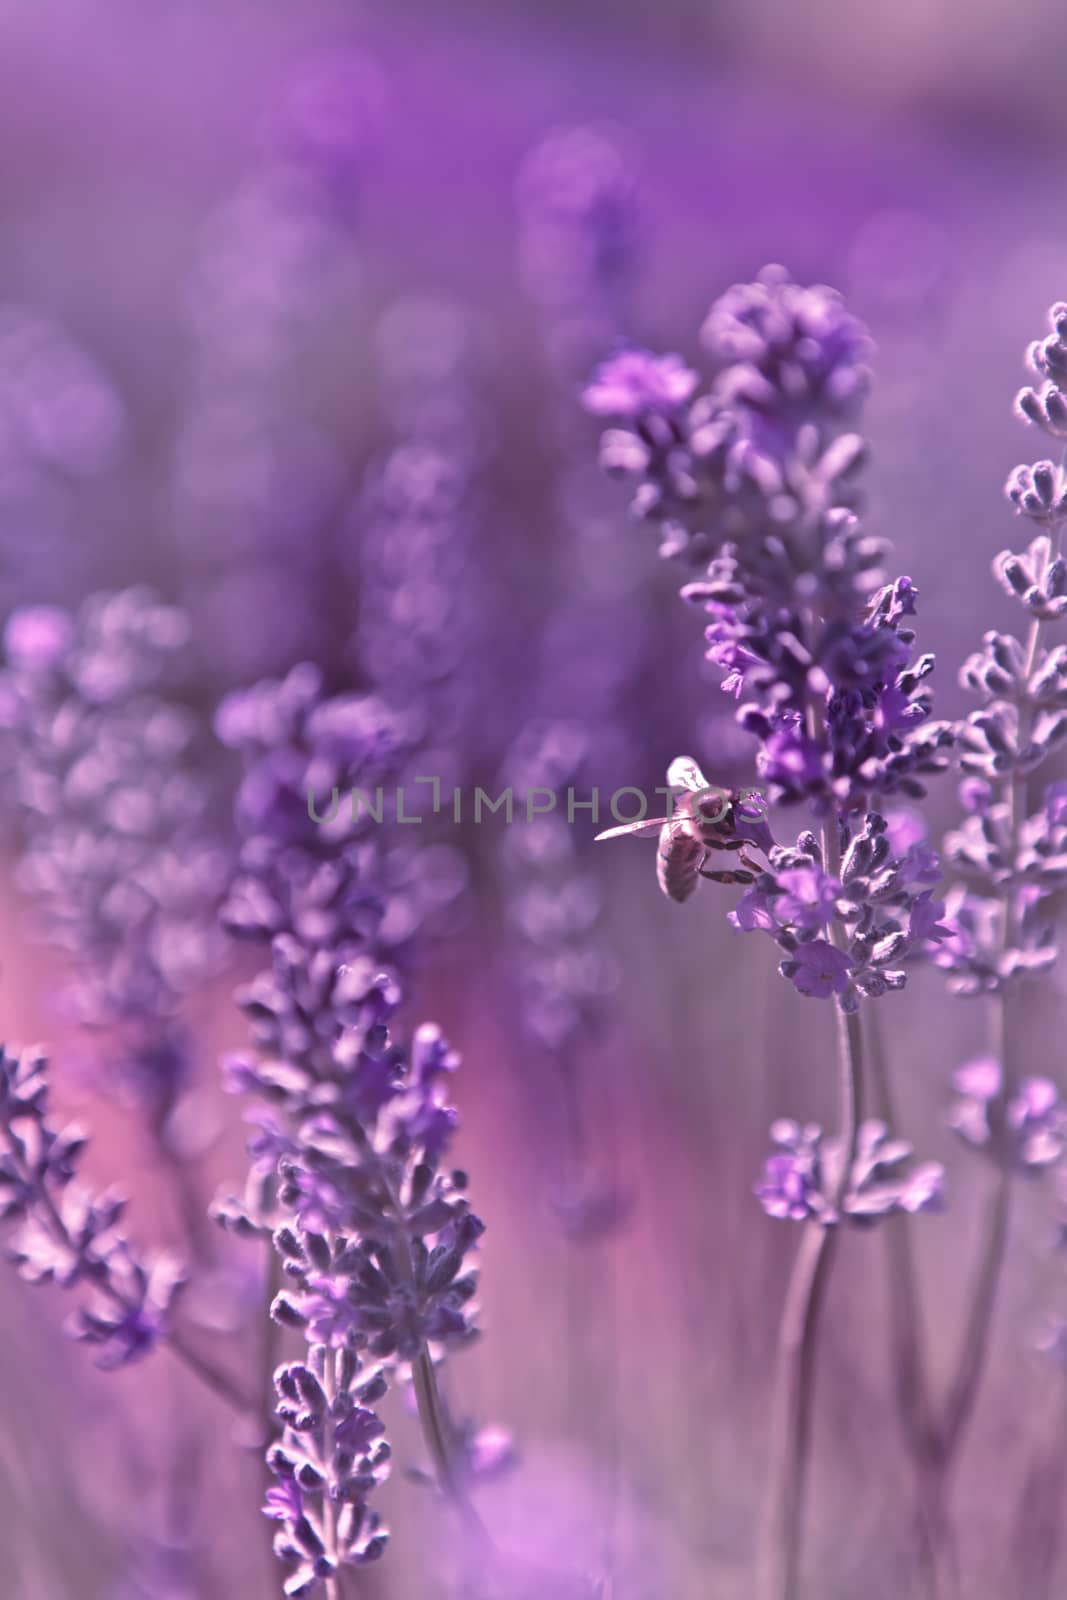 Ethereal image with shallow depth of field and lots of soft purple blur of a bee on a lavender bush